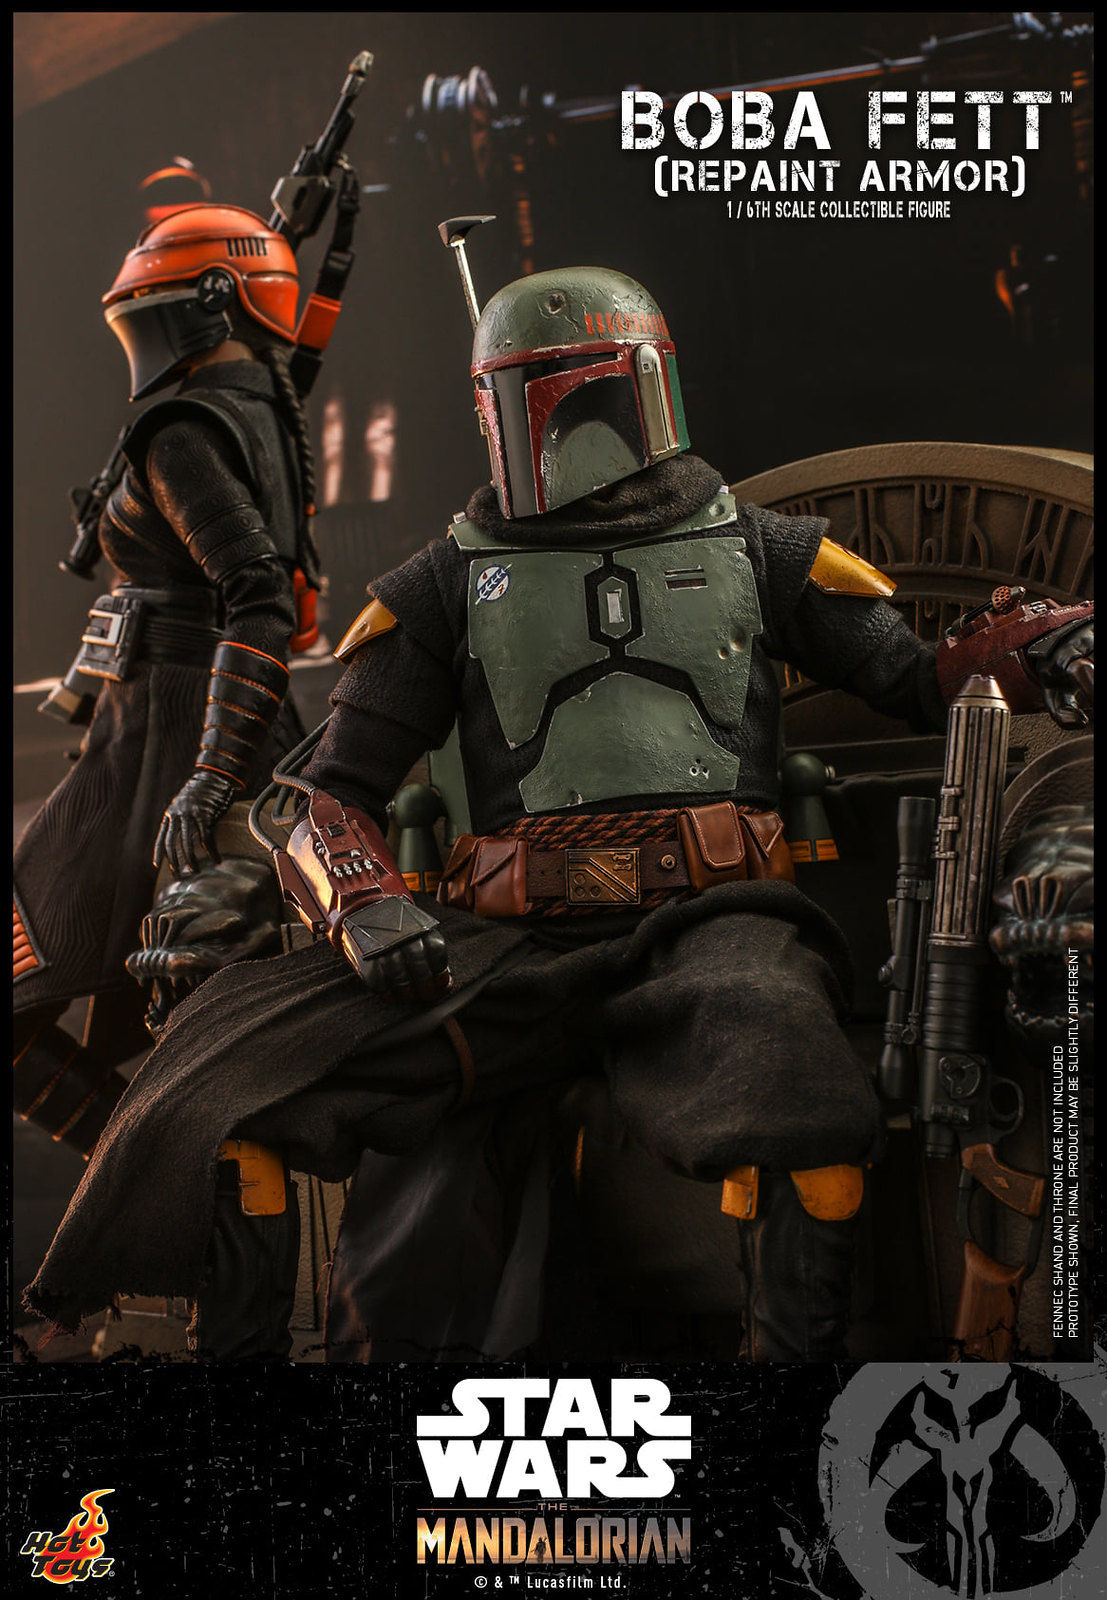 Star Wars: The Mandalorian™ - 1/6th scale Boba Fett™ (Repaint Armor) Collectible figure/ figure and Throne Collectible Set 51312011749_d5a8403553_h